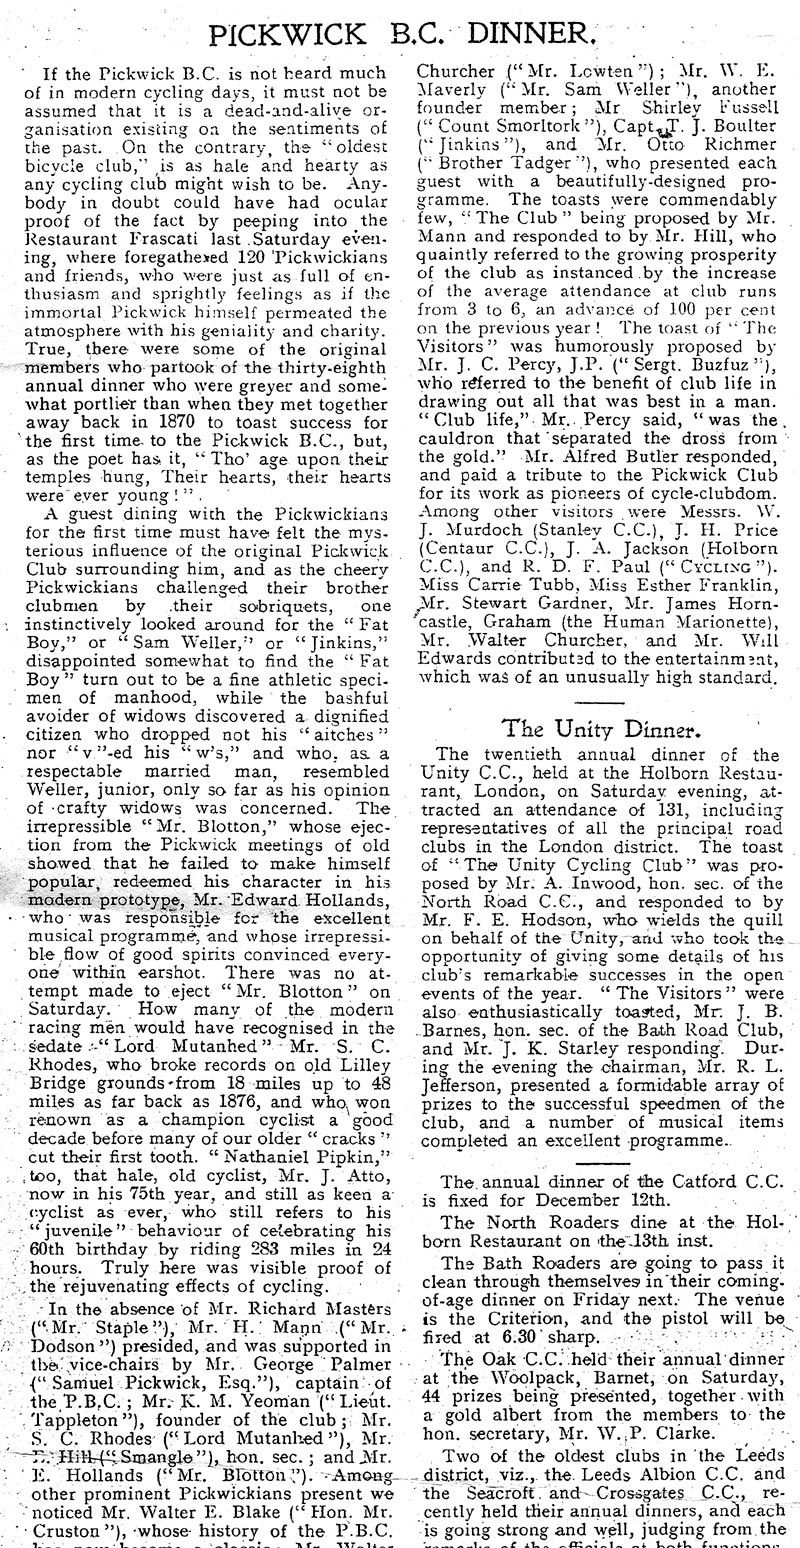 Press report of Annual Dinner 1907